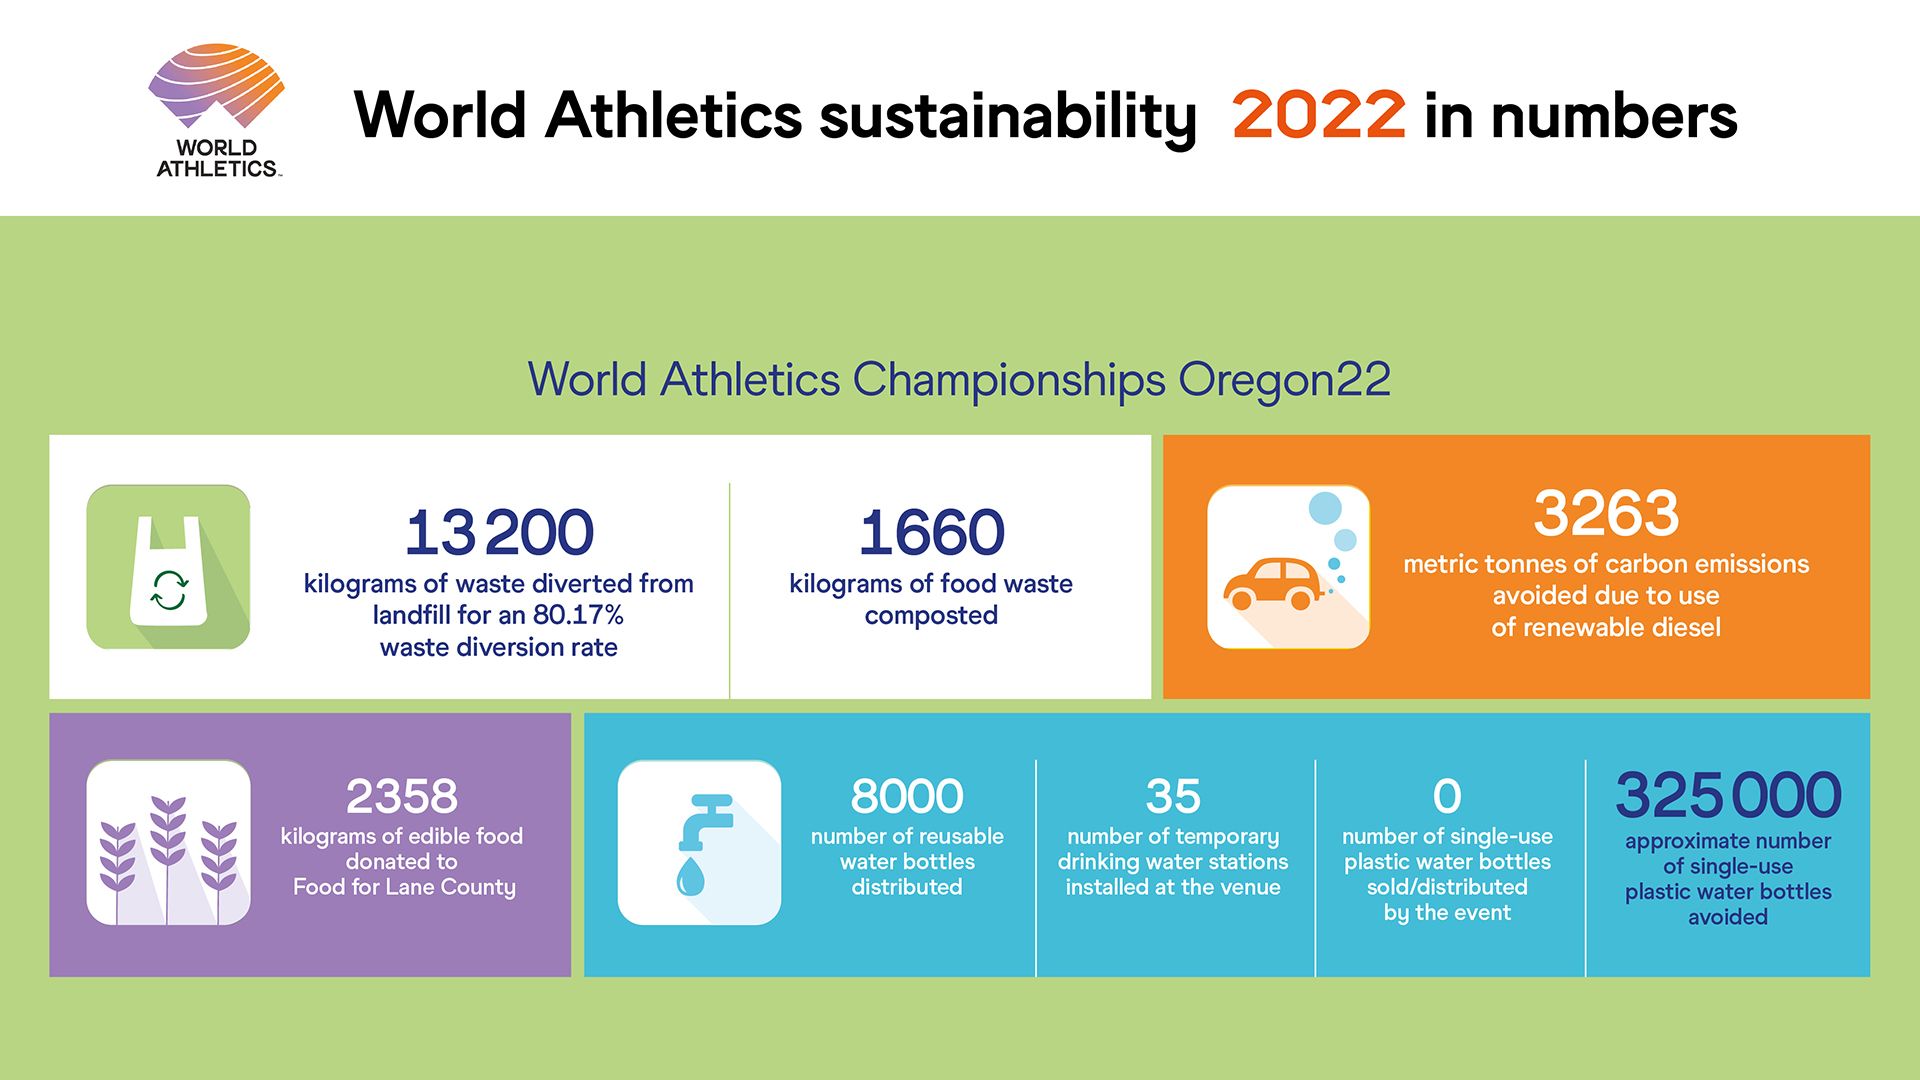 World Athletics sustainability 2022 in numbers - WCH Oregon22